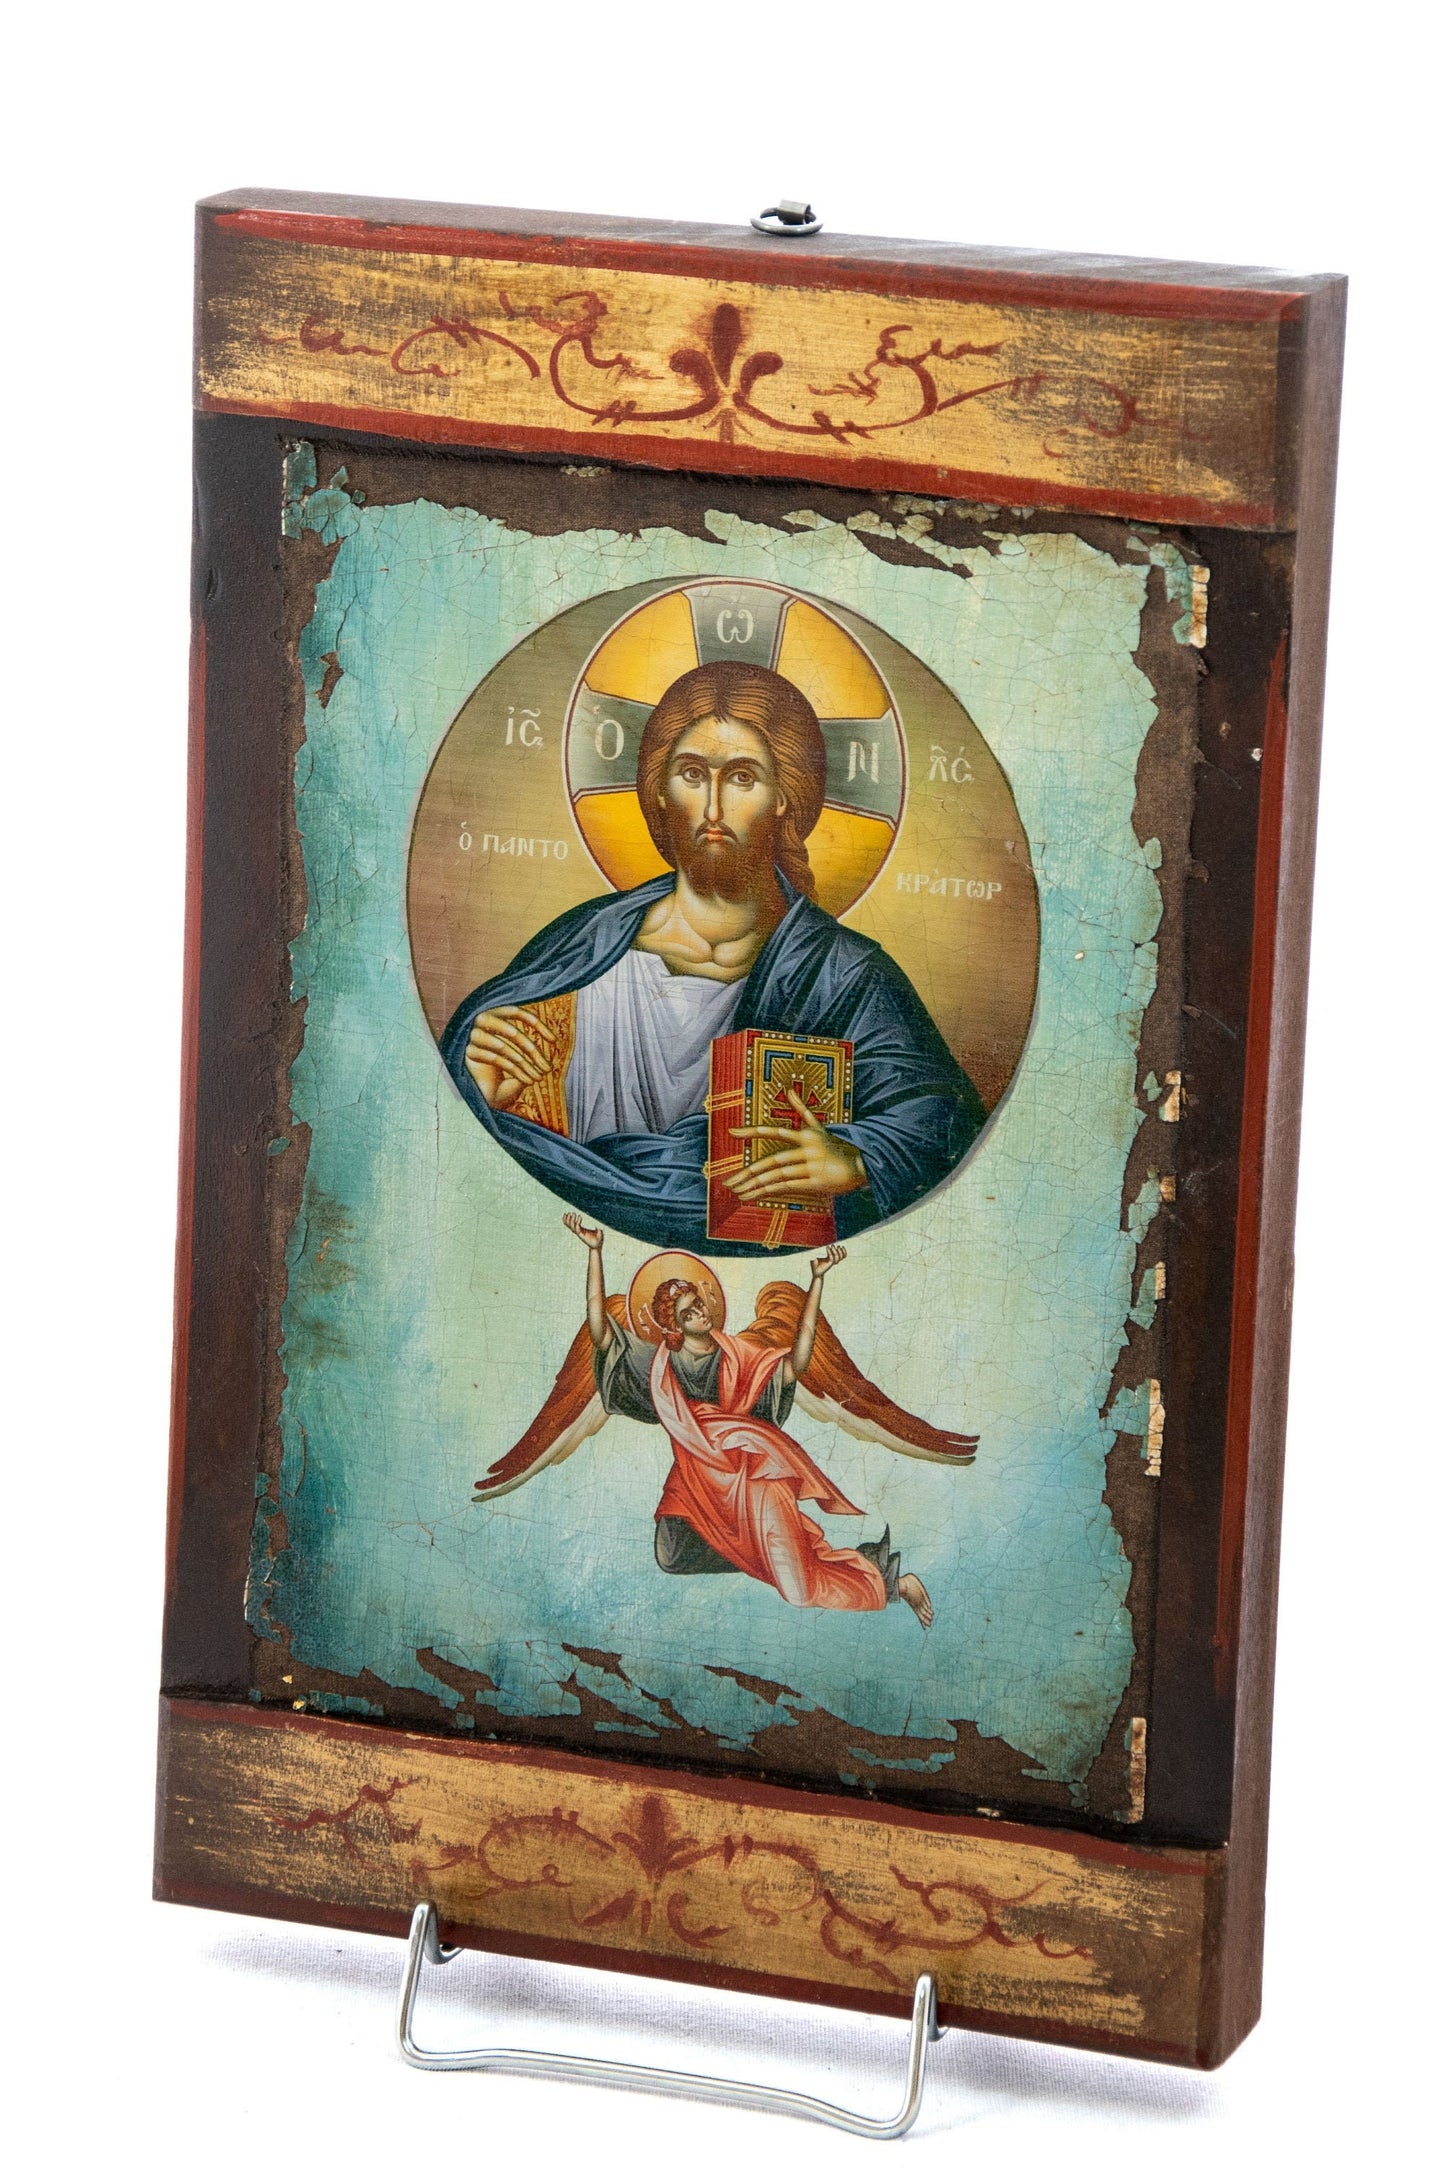 Jesus Christ icon Pantocrator, Handmade Greek Orthodox icon of our Lord, Byzantine art wall hanging canvas icon wood plaque 38x24cm TheHolyArt